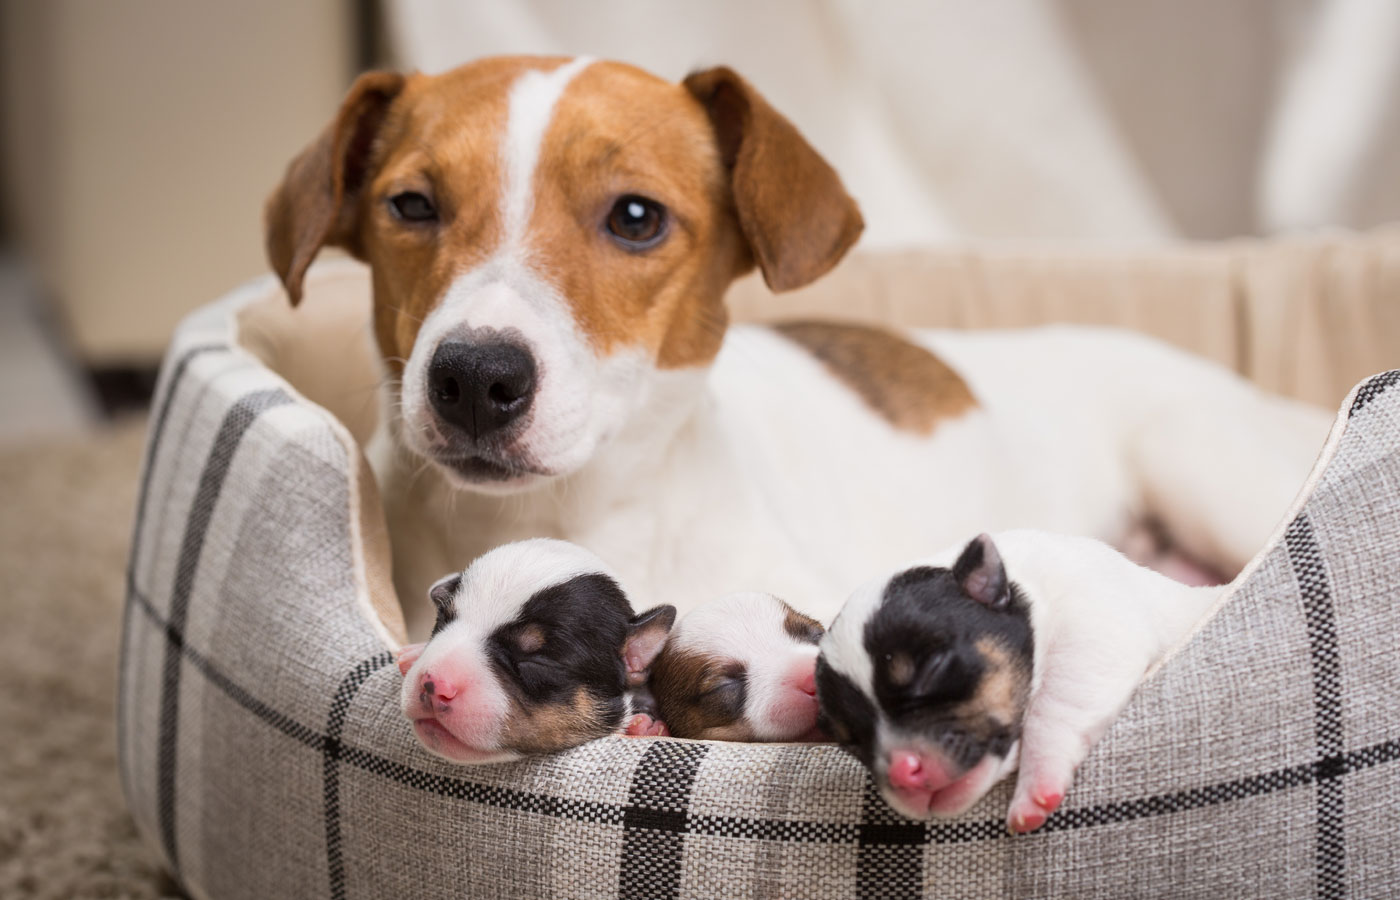 Dog with young puppies